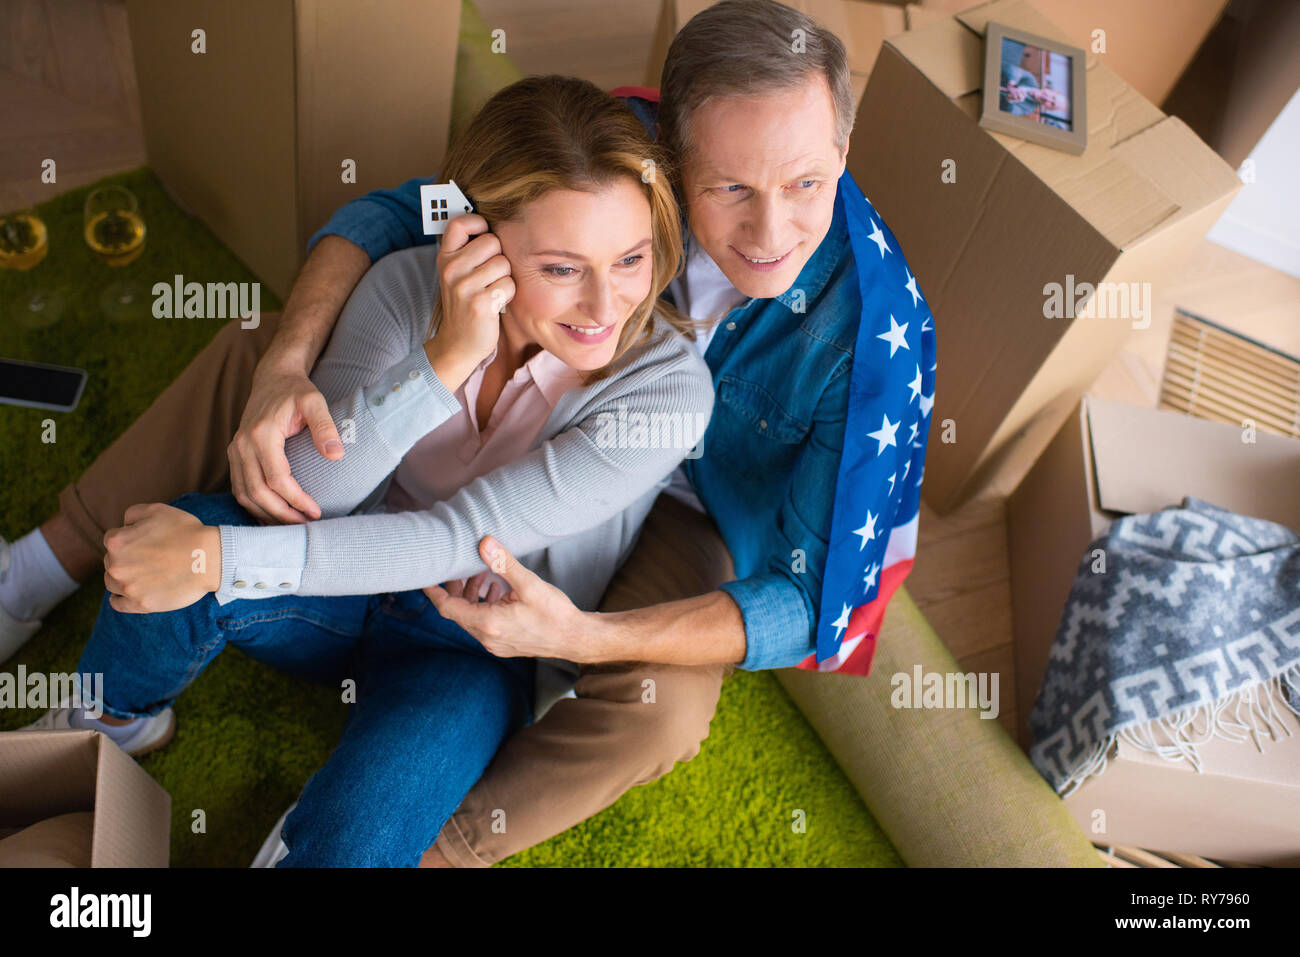 happy woman holding keys with house model trinket while sitting on floor with husband Stock Photo